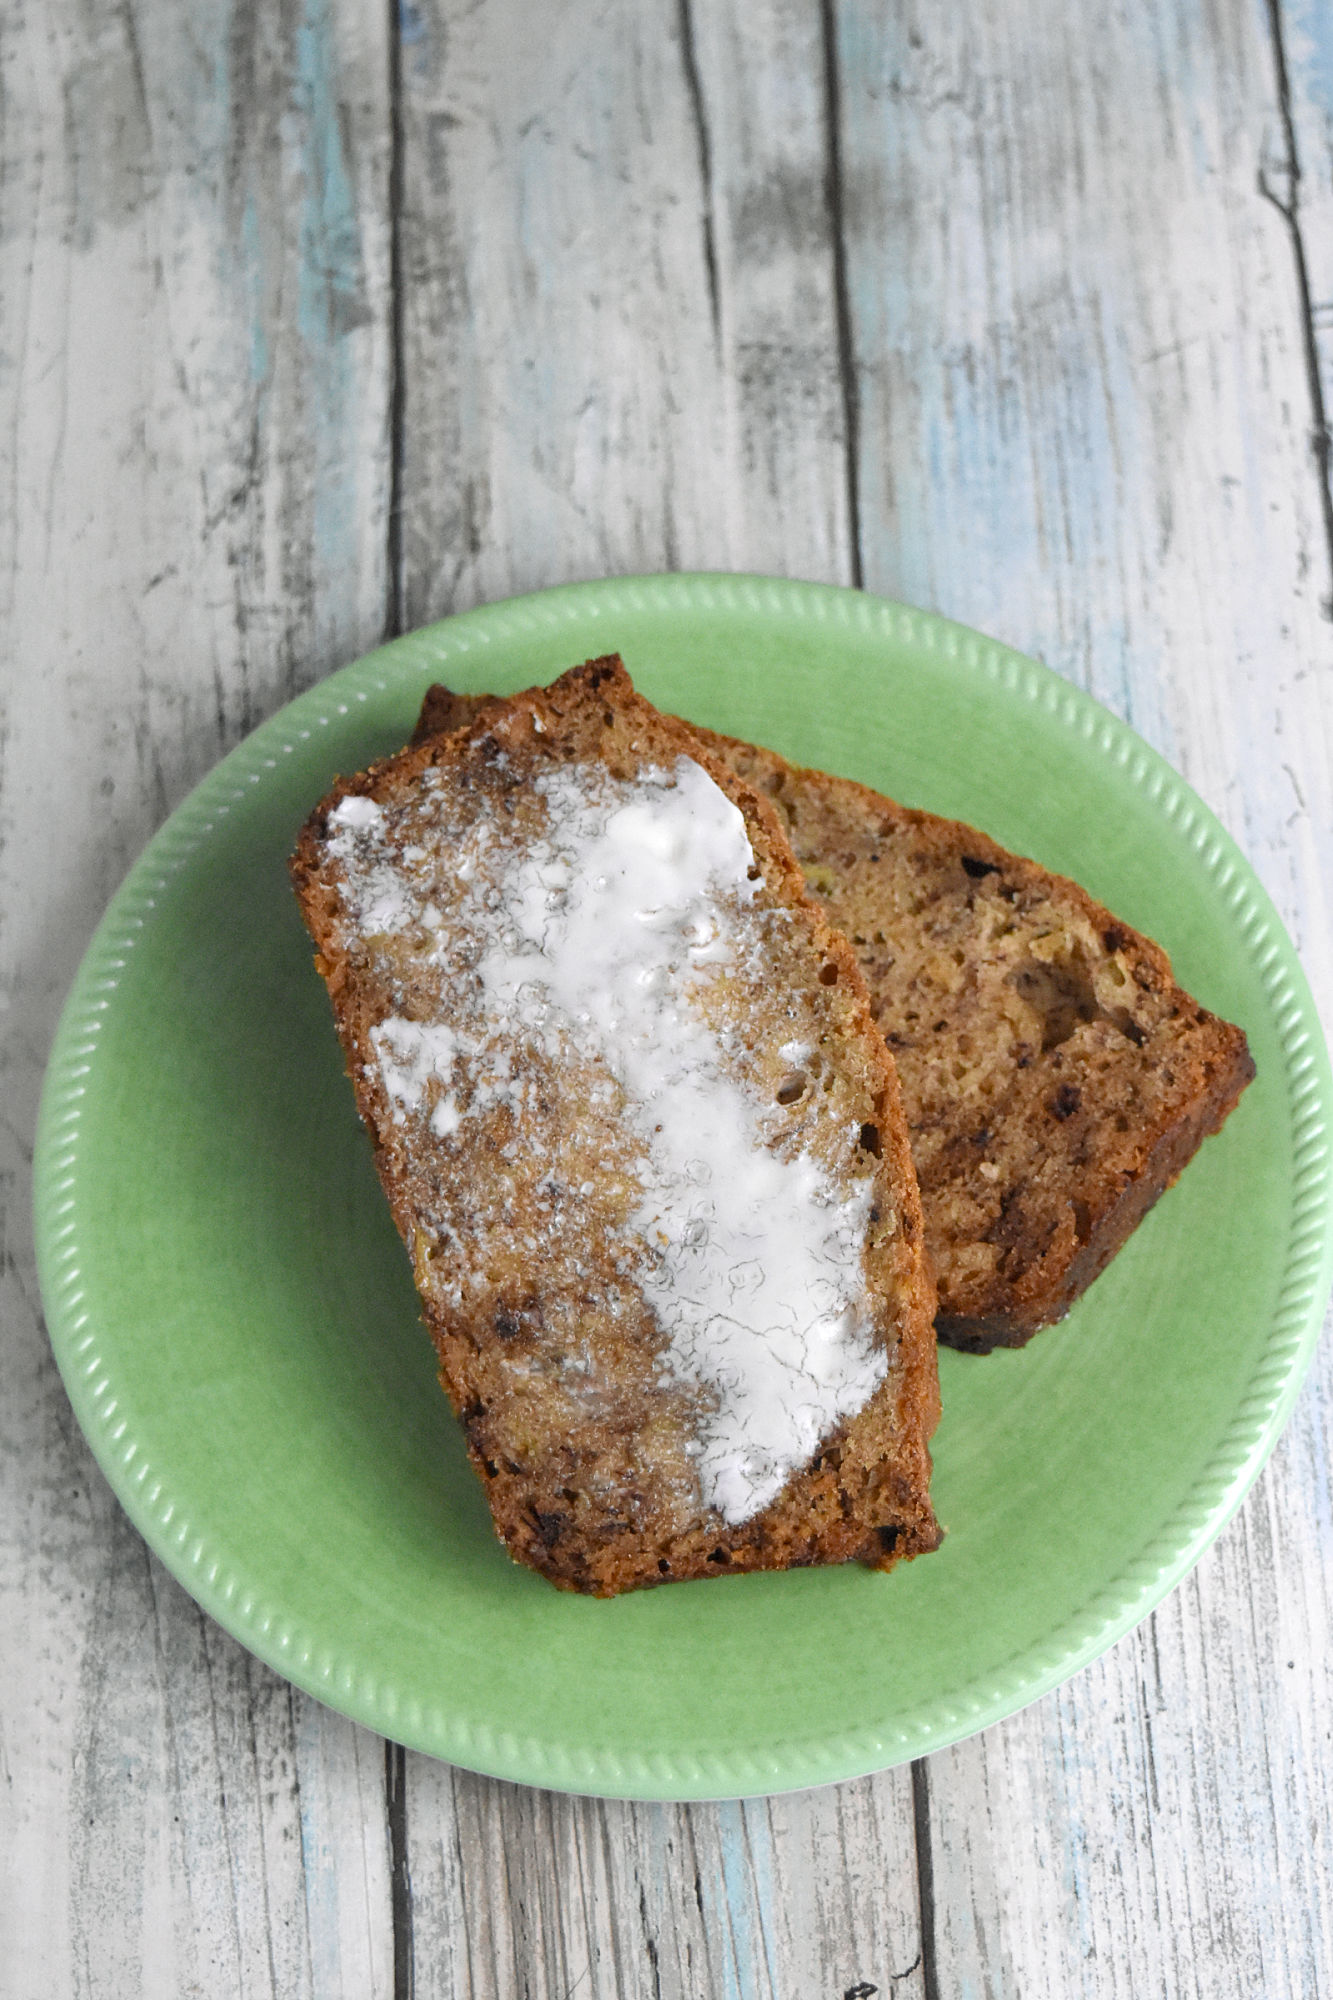 ^Chai Banana Bread^ is moist, delicious, and full of chai spice flavors. It’s buttery, sweet, and irresistible. #OurFamilyTable #quickbread #bananabread #chaispice 